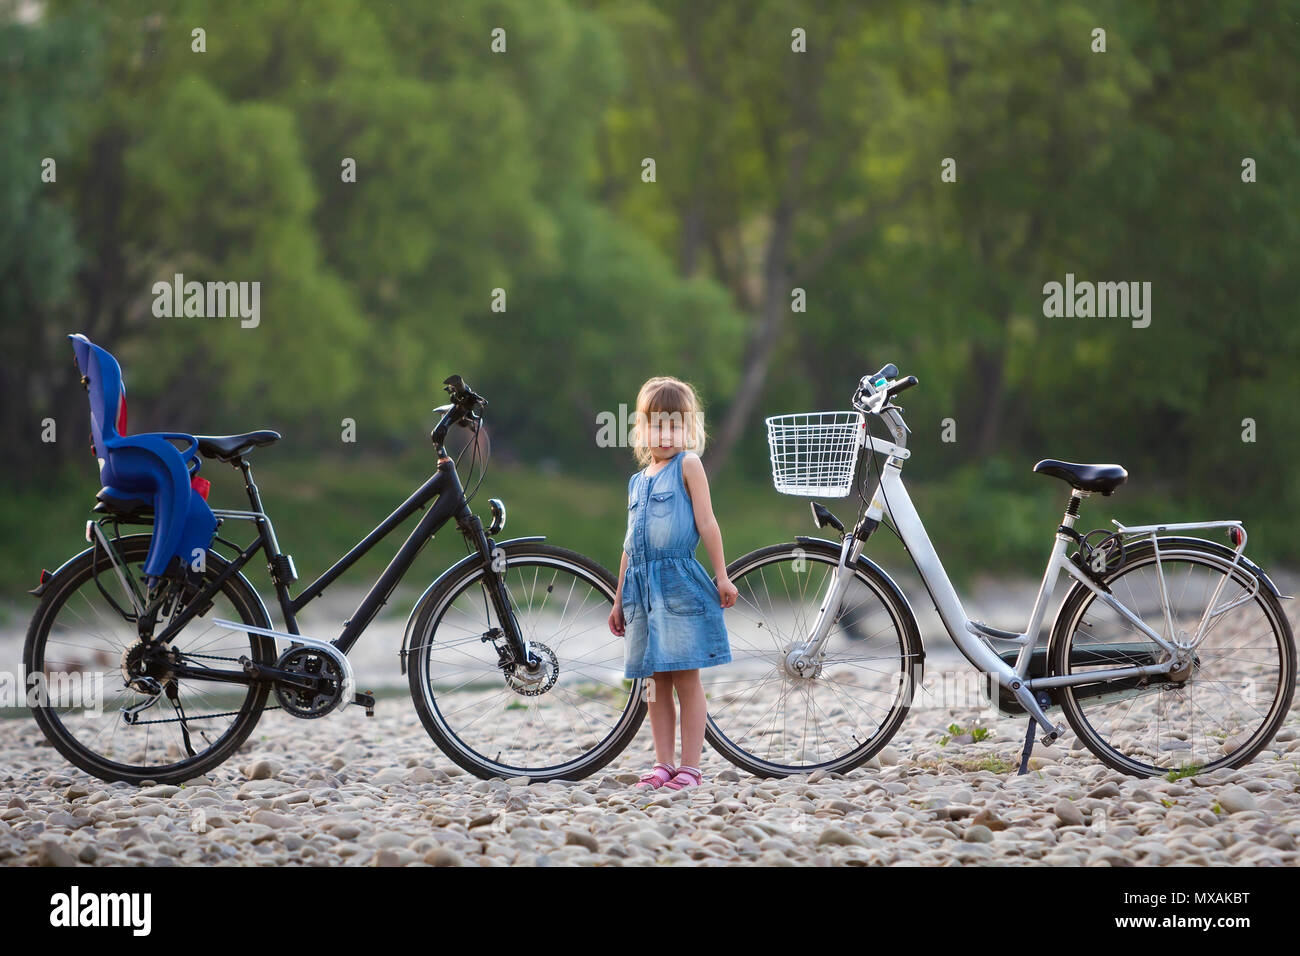 Small pretty blond girl in blue dress standing in front of white bicycle with bucket and black one with child seat on blurred green trees background.  Stock Photo